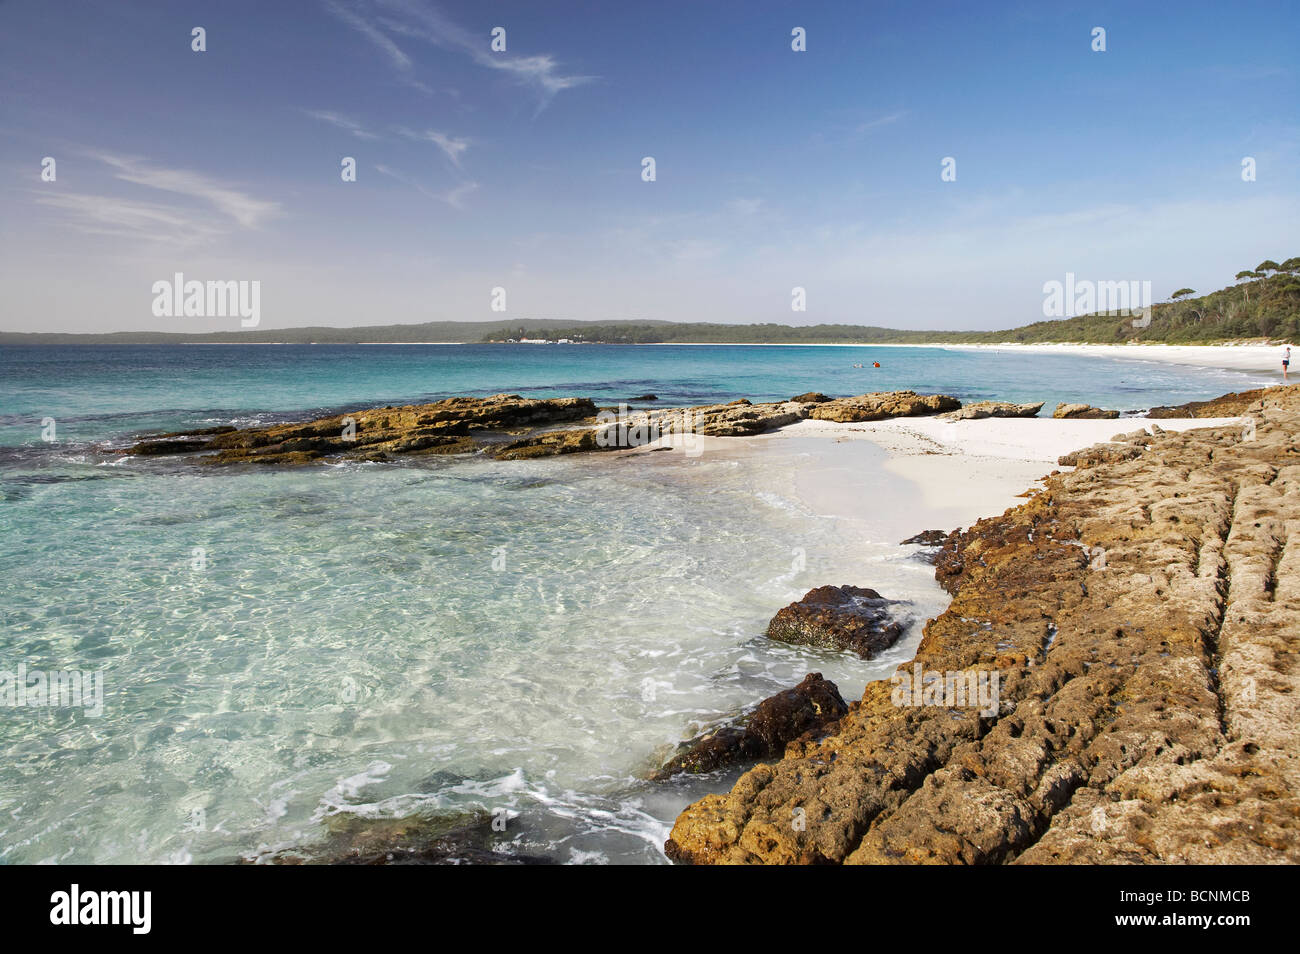 Plage des Roches Hyams Jervis Bay, New South Wales Australie Banque D'Images